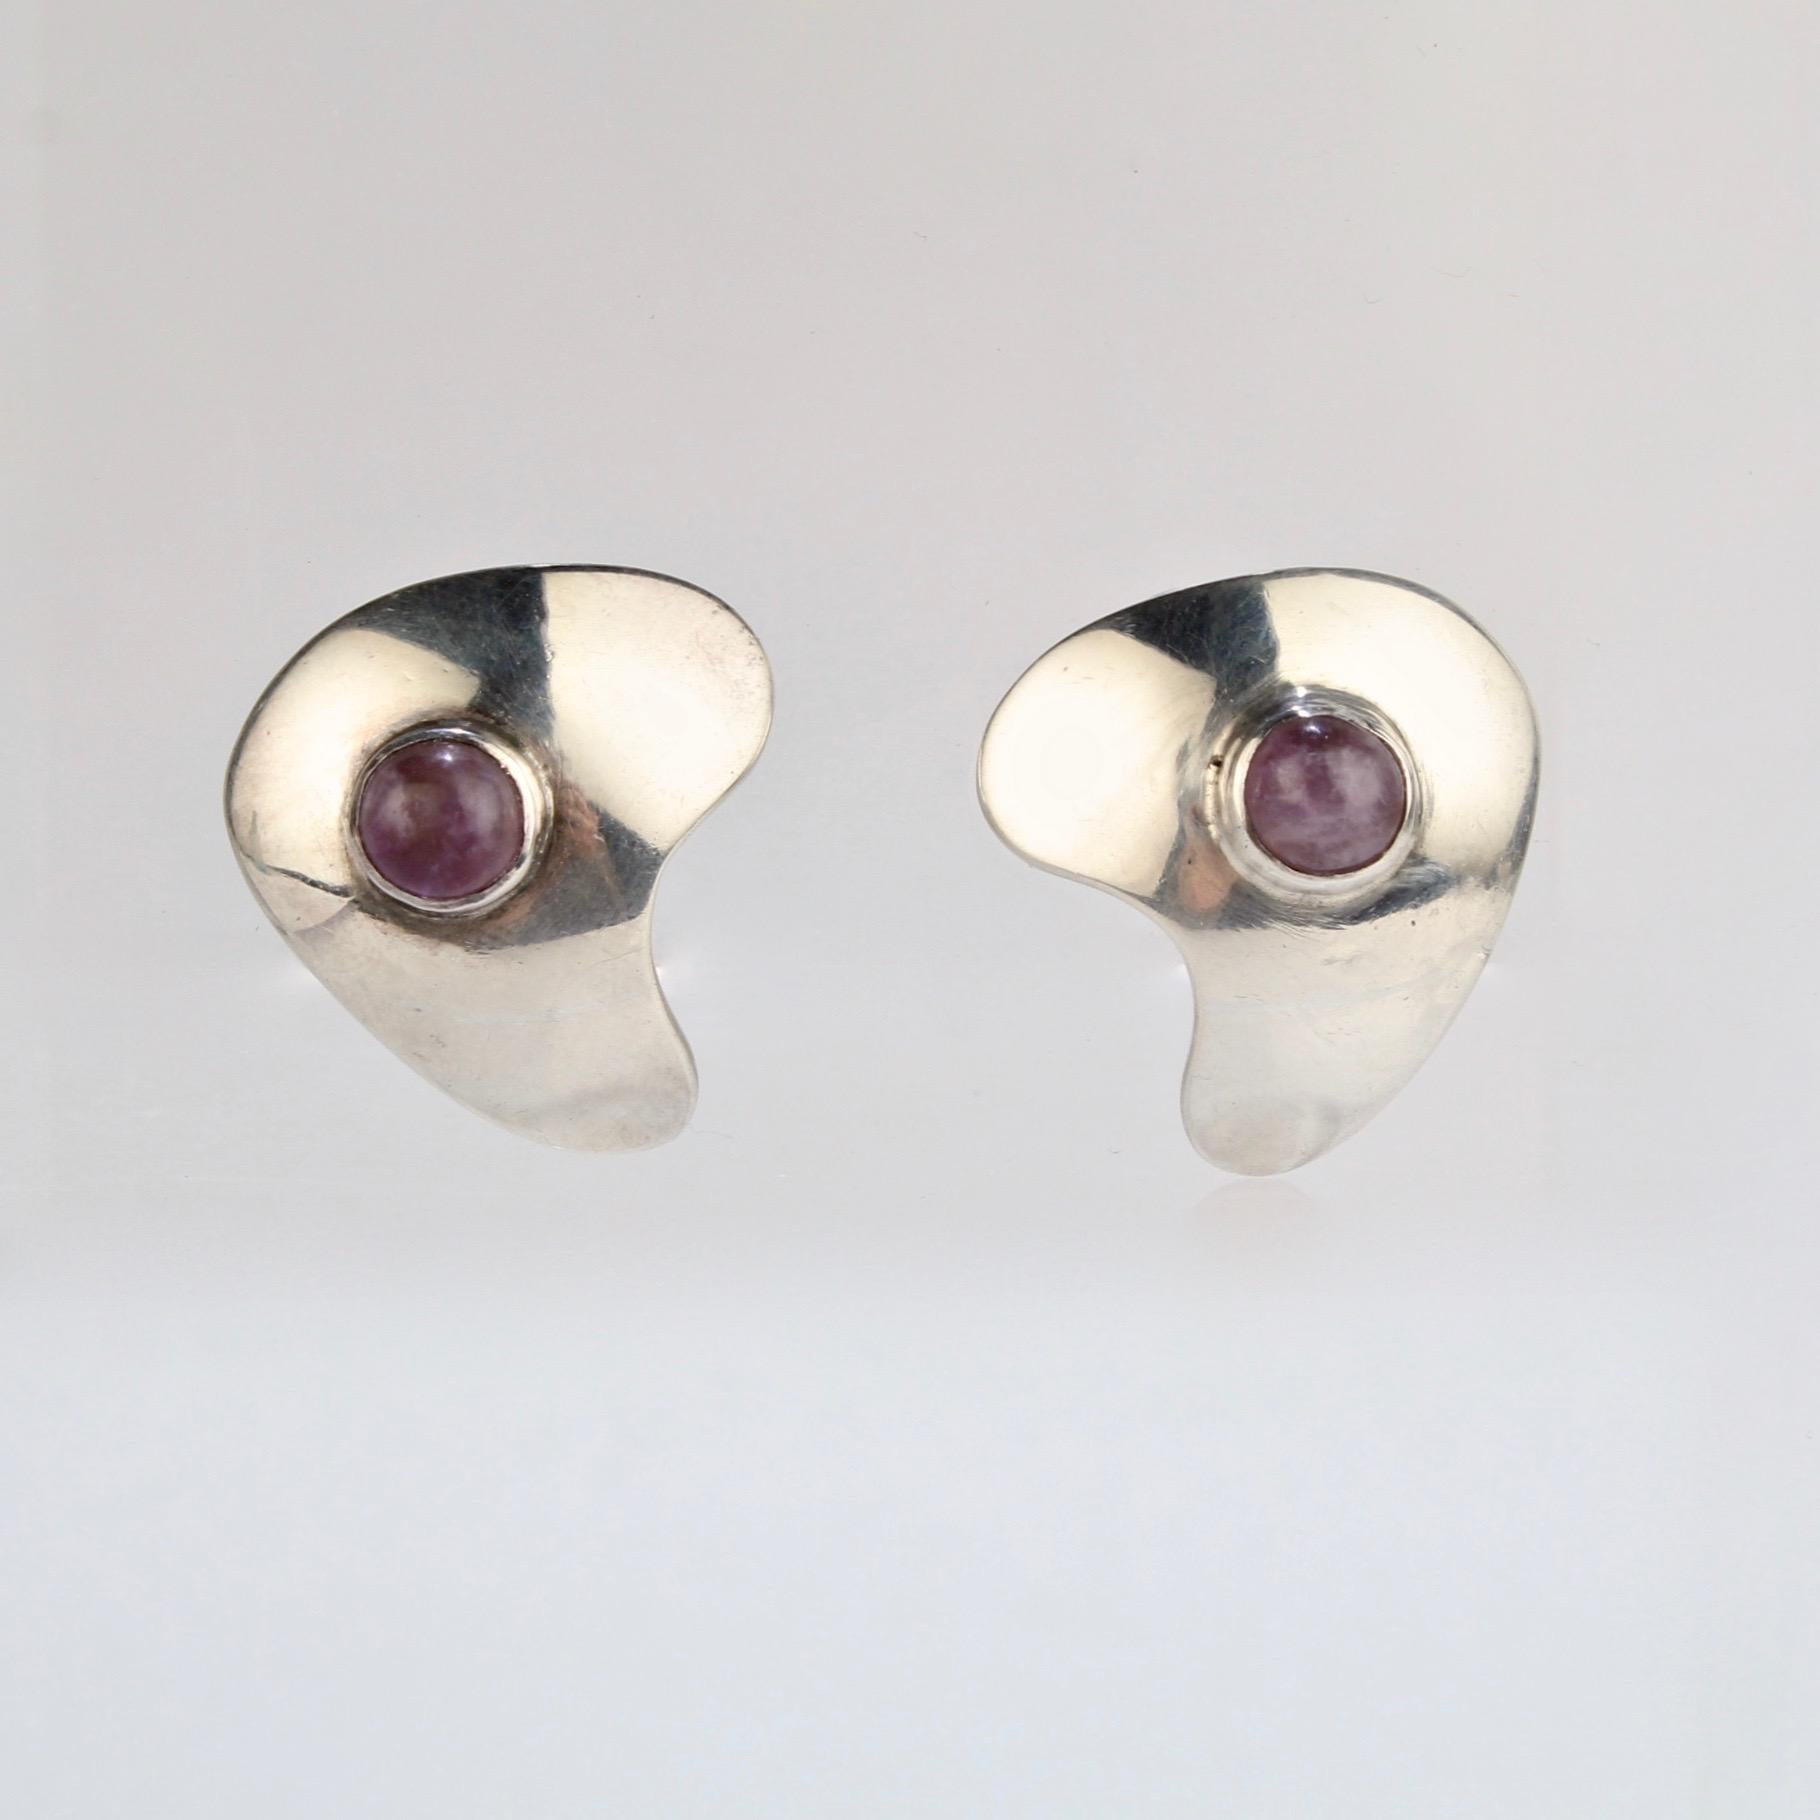 A wonderful pair of Sam Kramer sterling silver and amethyst earrings.

Each abstract, convex earring is bezel set with an amethyst cabochon.

Marked on the reverse with a mushroom mark for Sam Kramer and Sterling.

A great pair of earrings from one